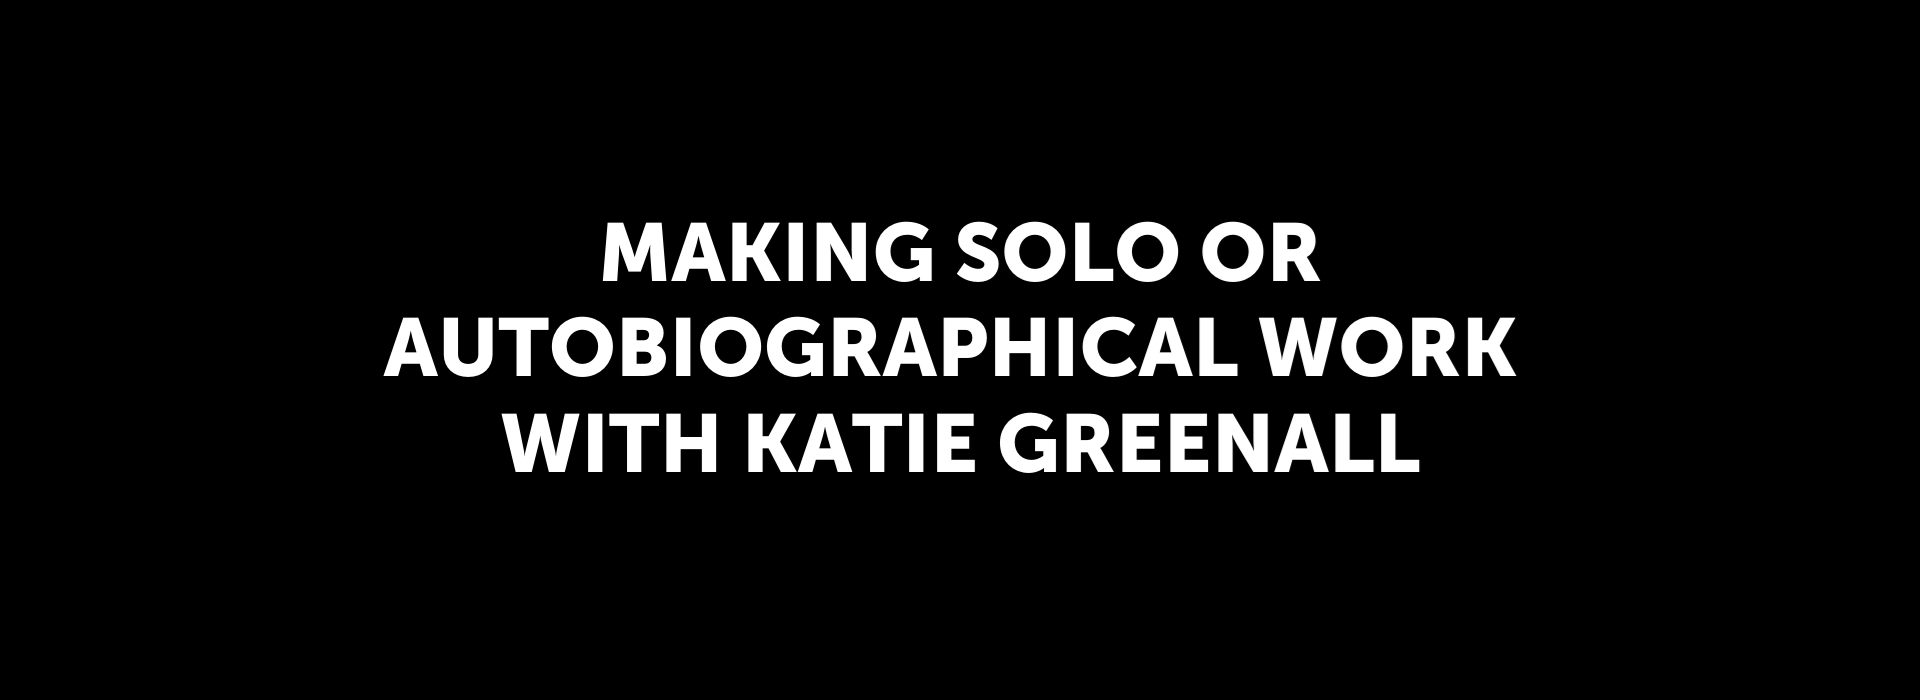 Making Solo or Autobiographical Work with Katie Greenall